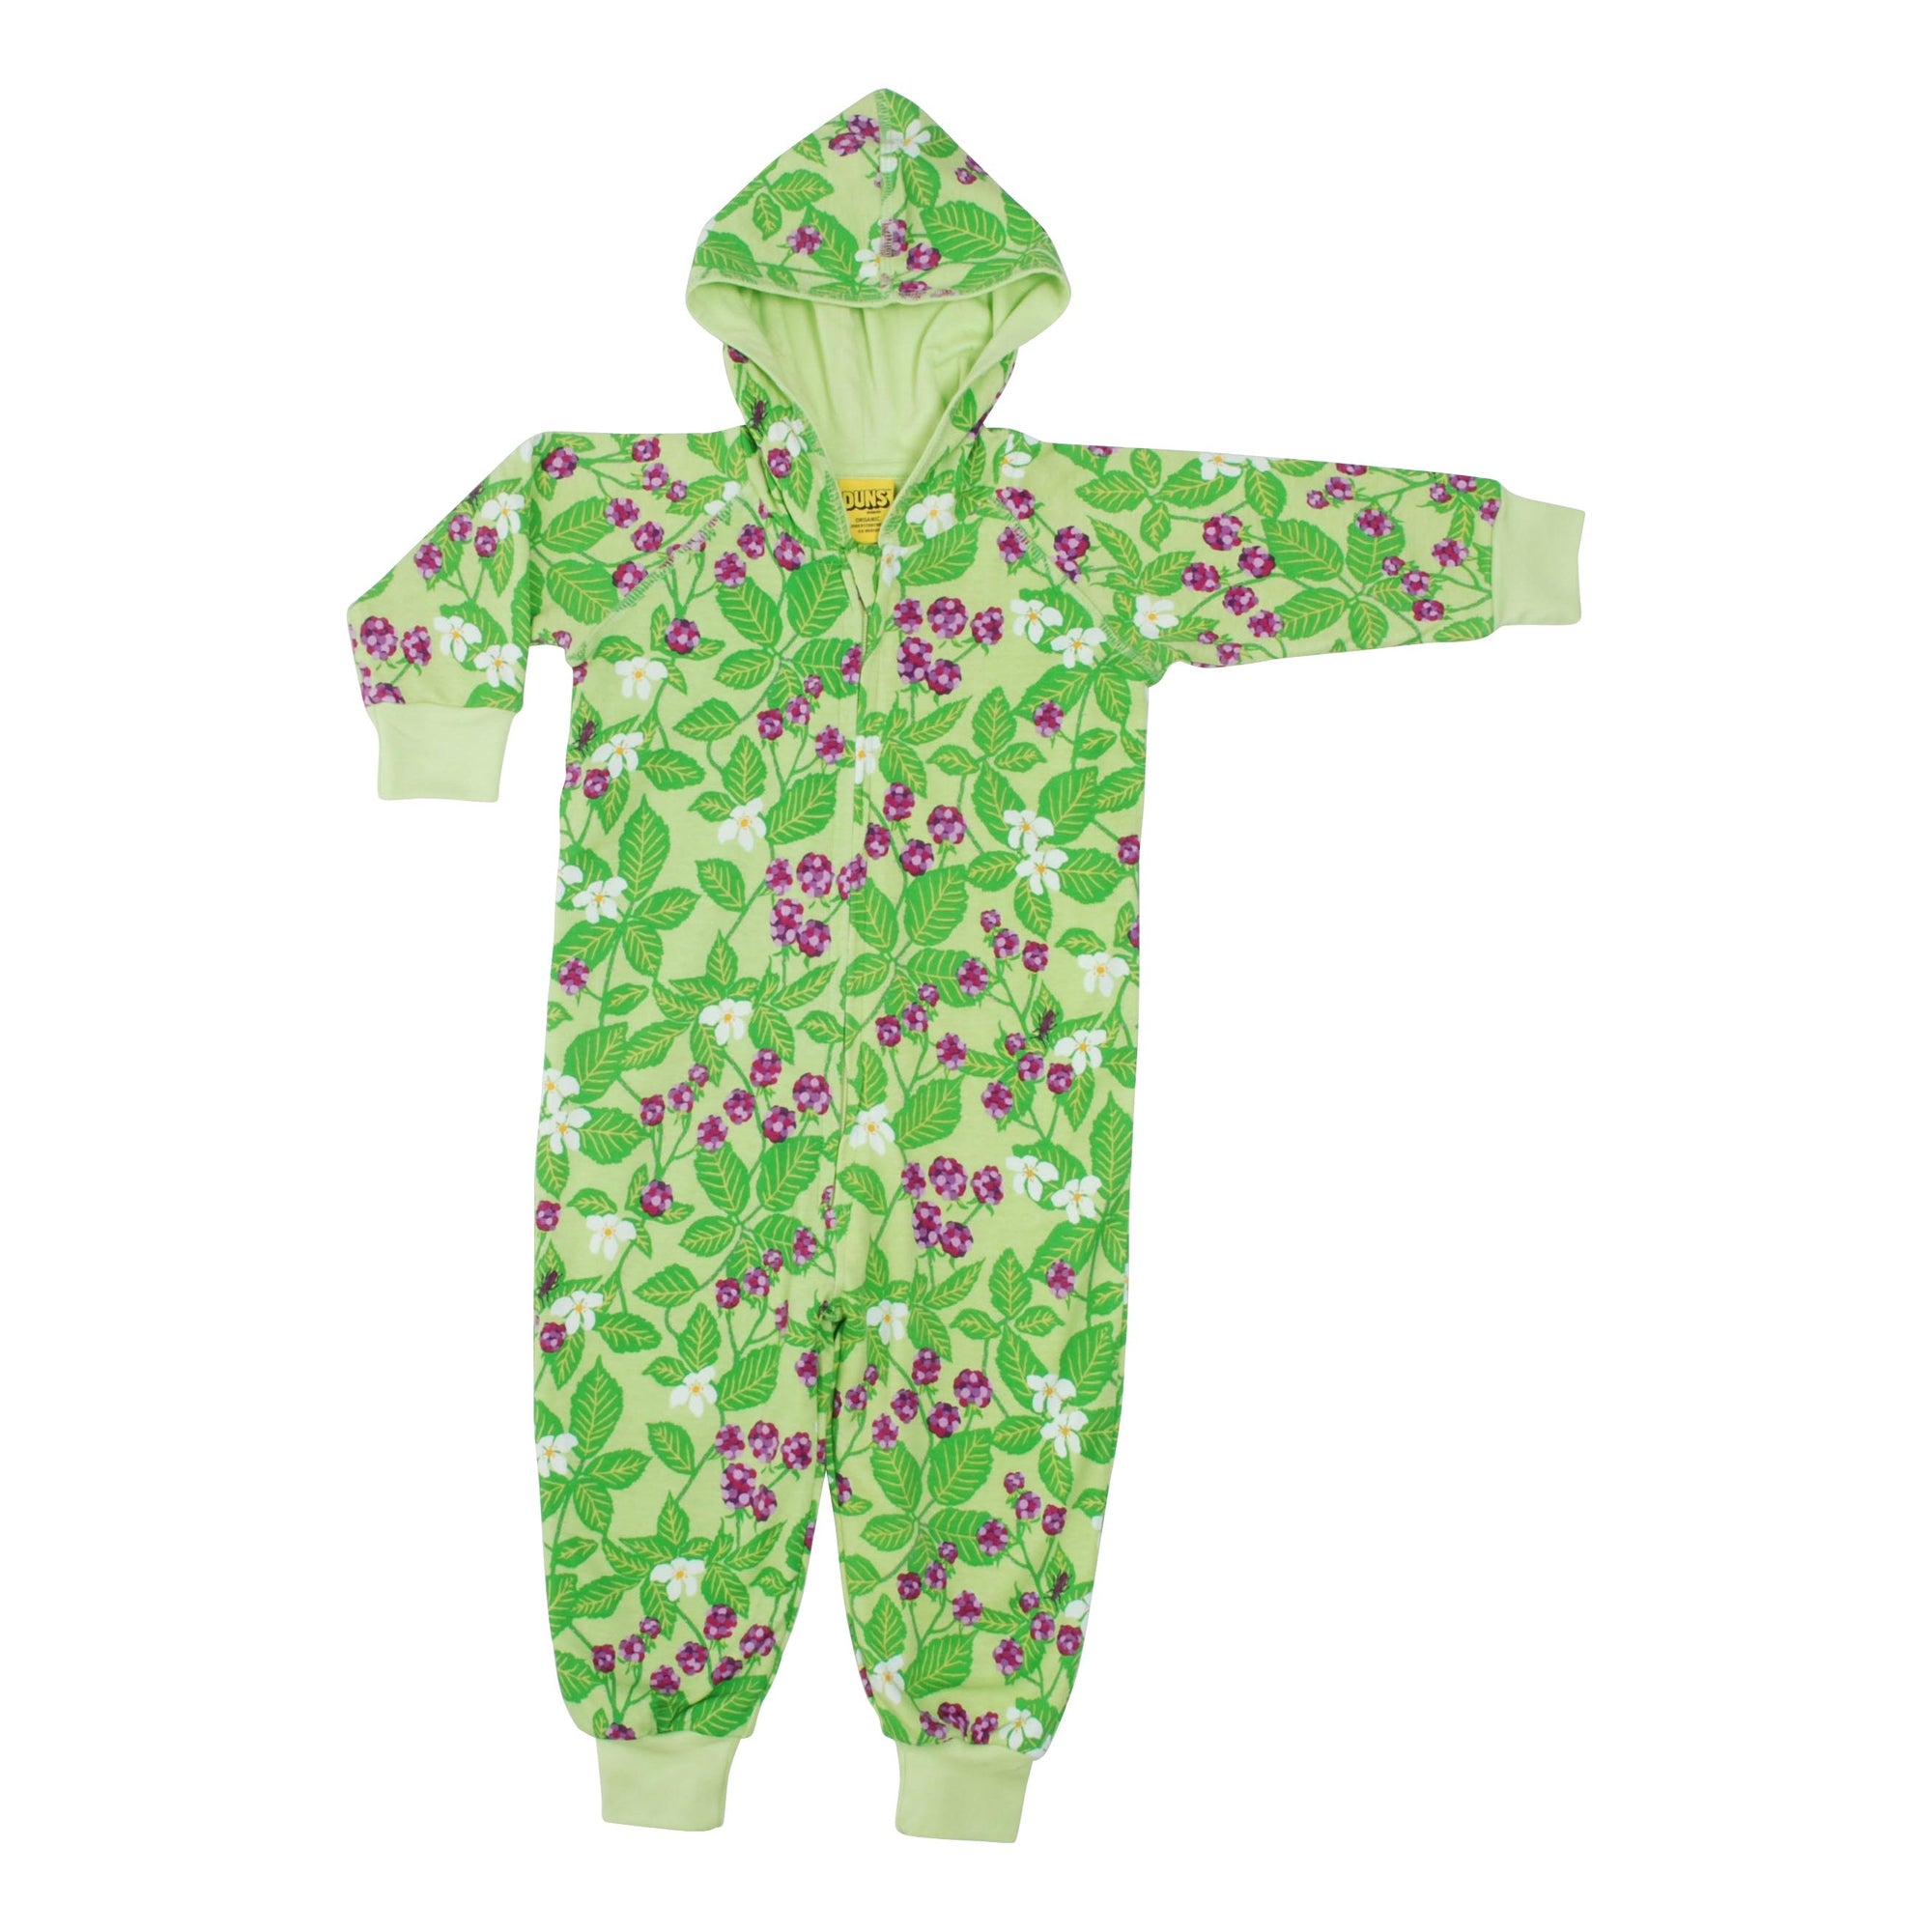 Dewberry - Green Hooded Lined Suit-Duns Sweden-Modern Rascals